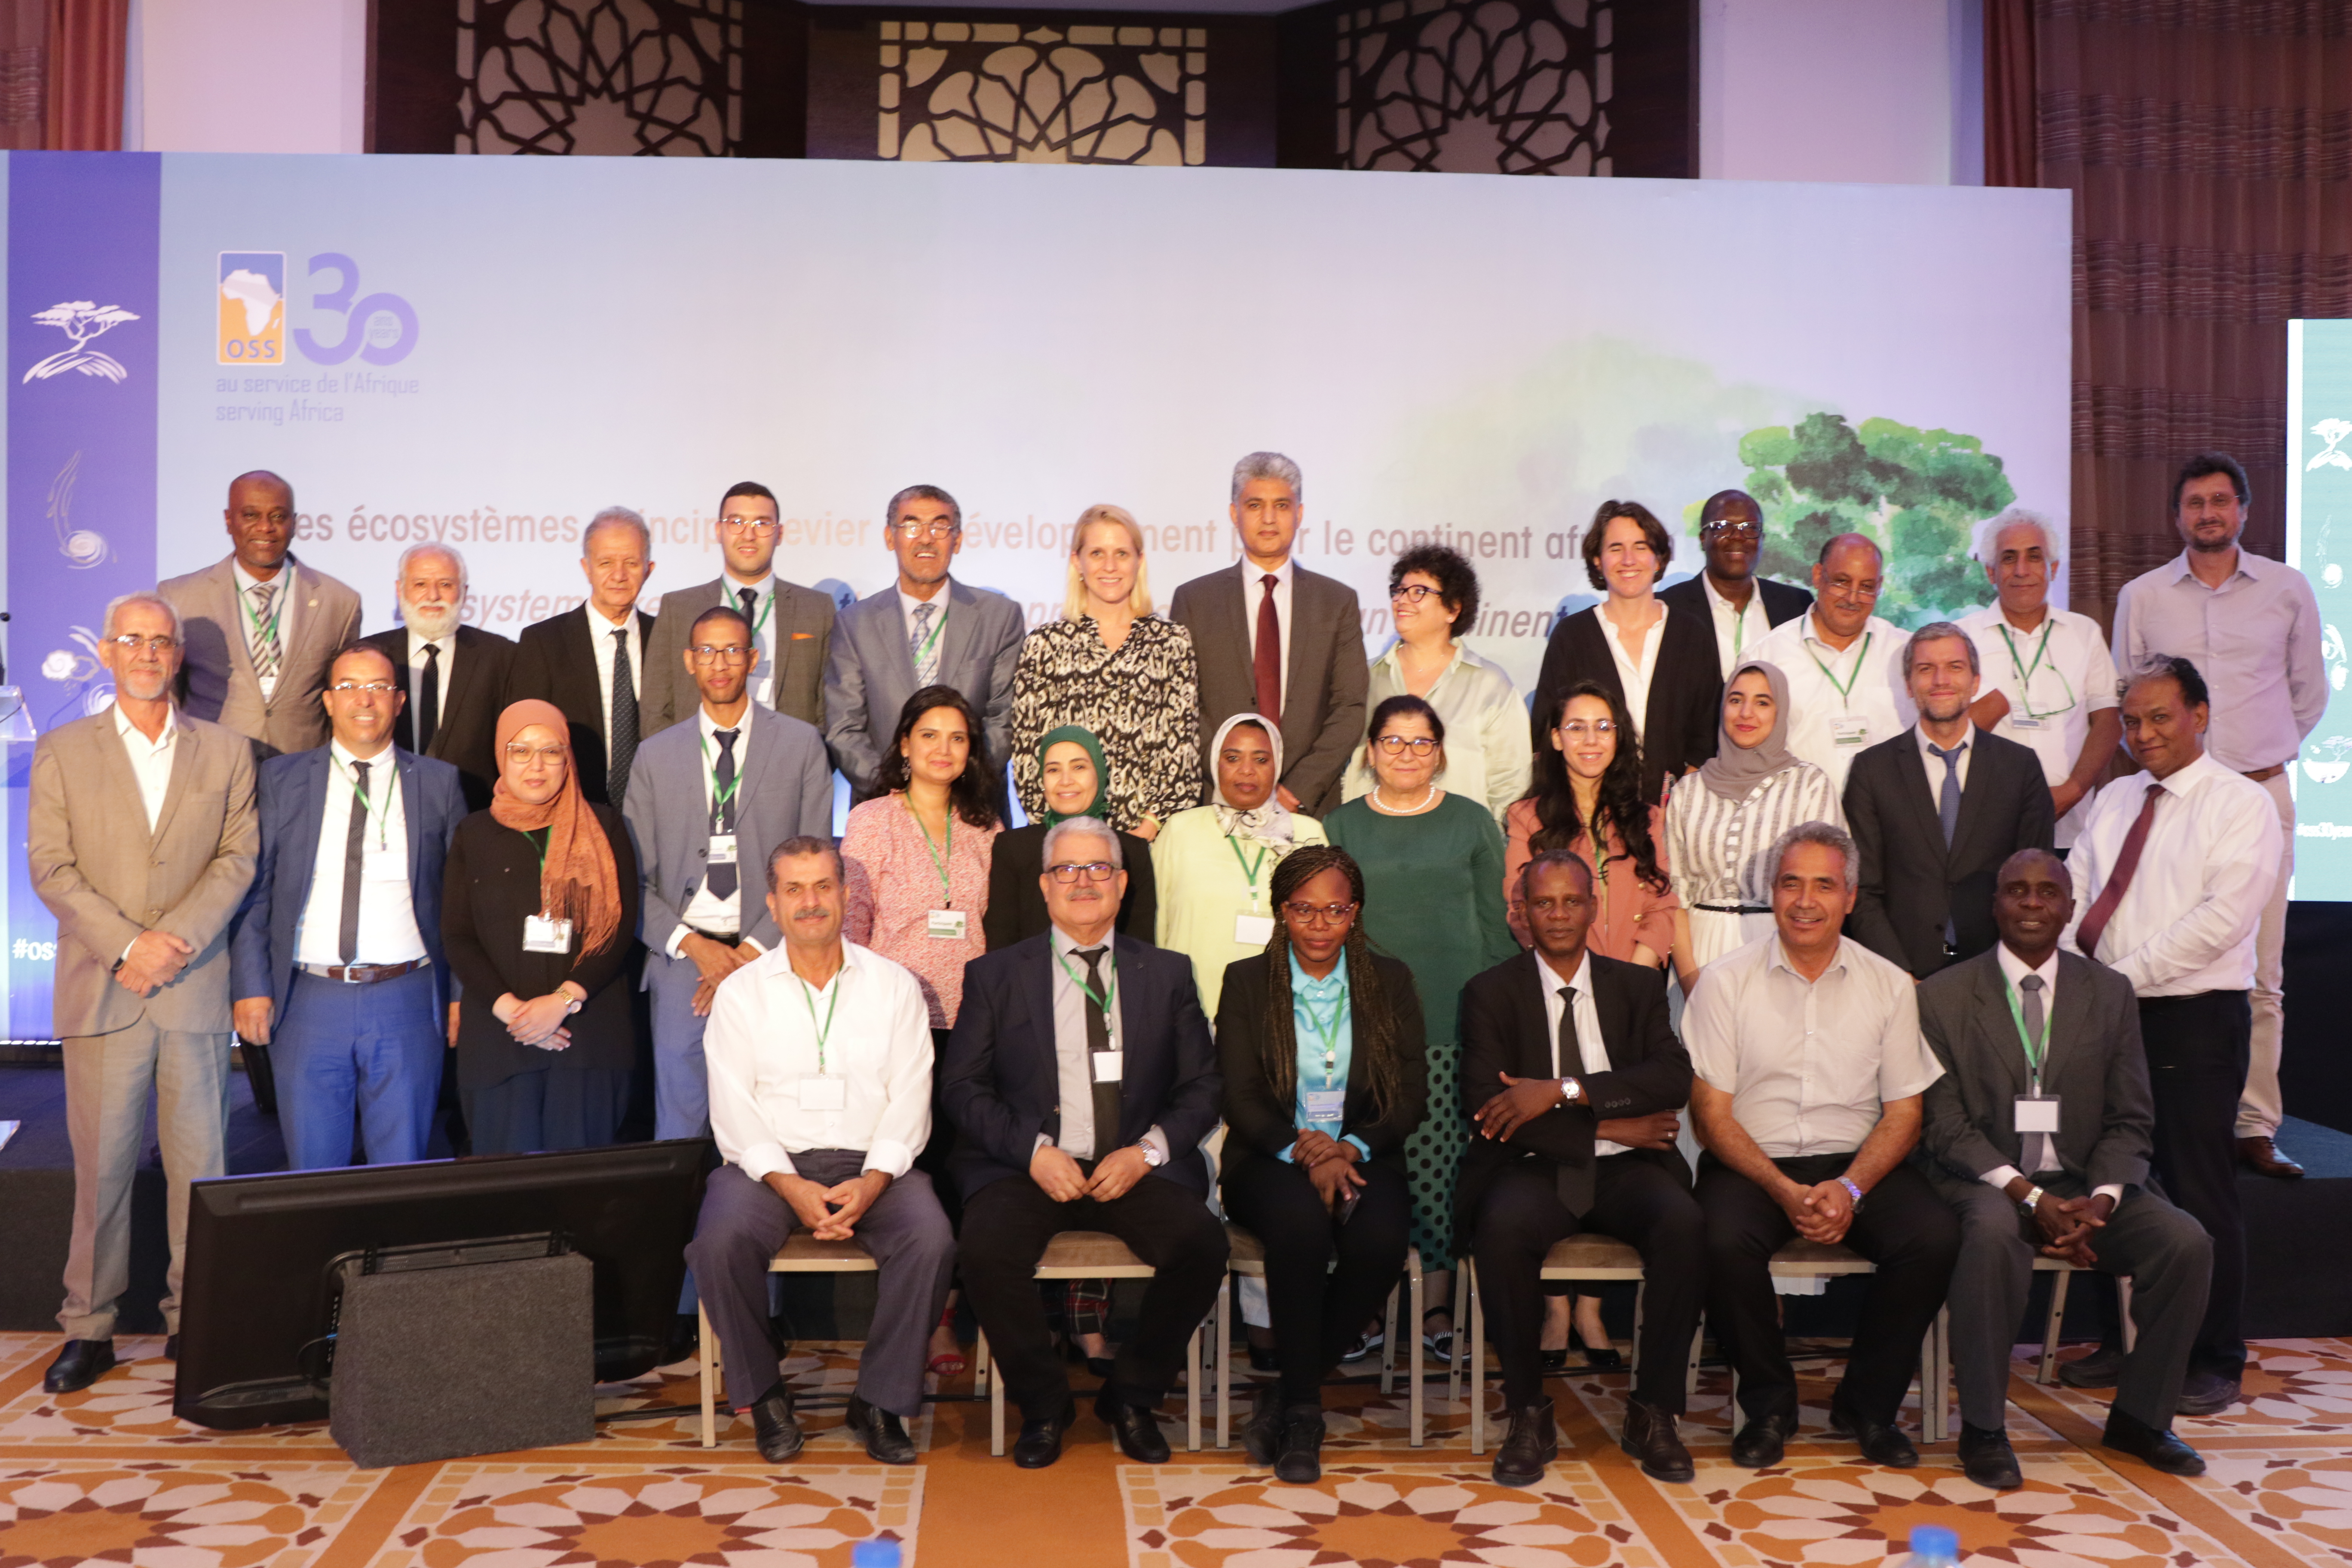  Regional workshop - Restitution of the "Water Stress in North Africa" ​​Initiative results